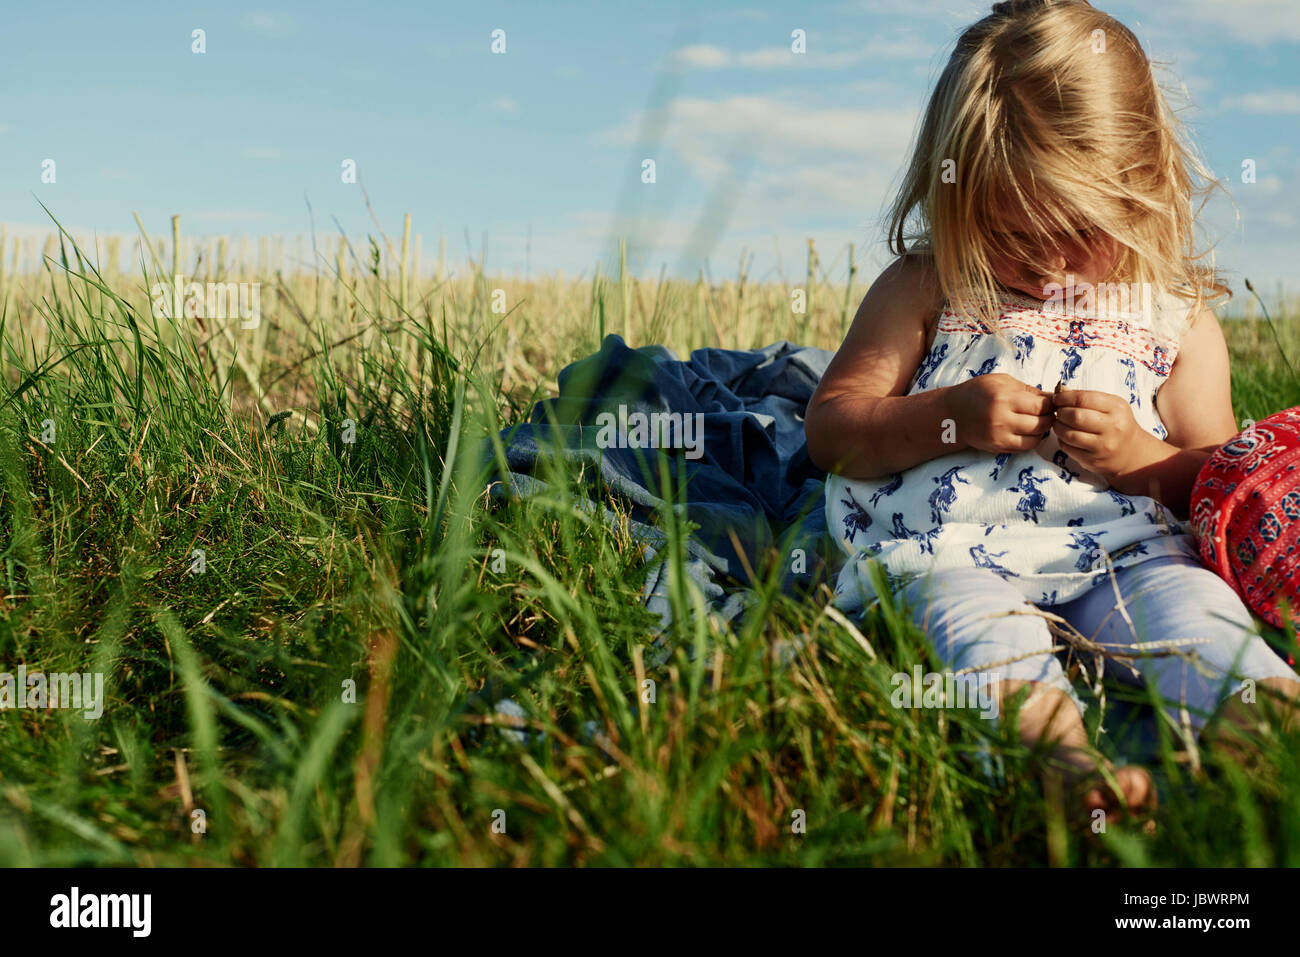 Female toddler sitting in field Stock Photo